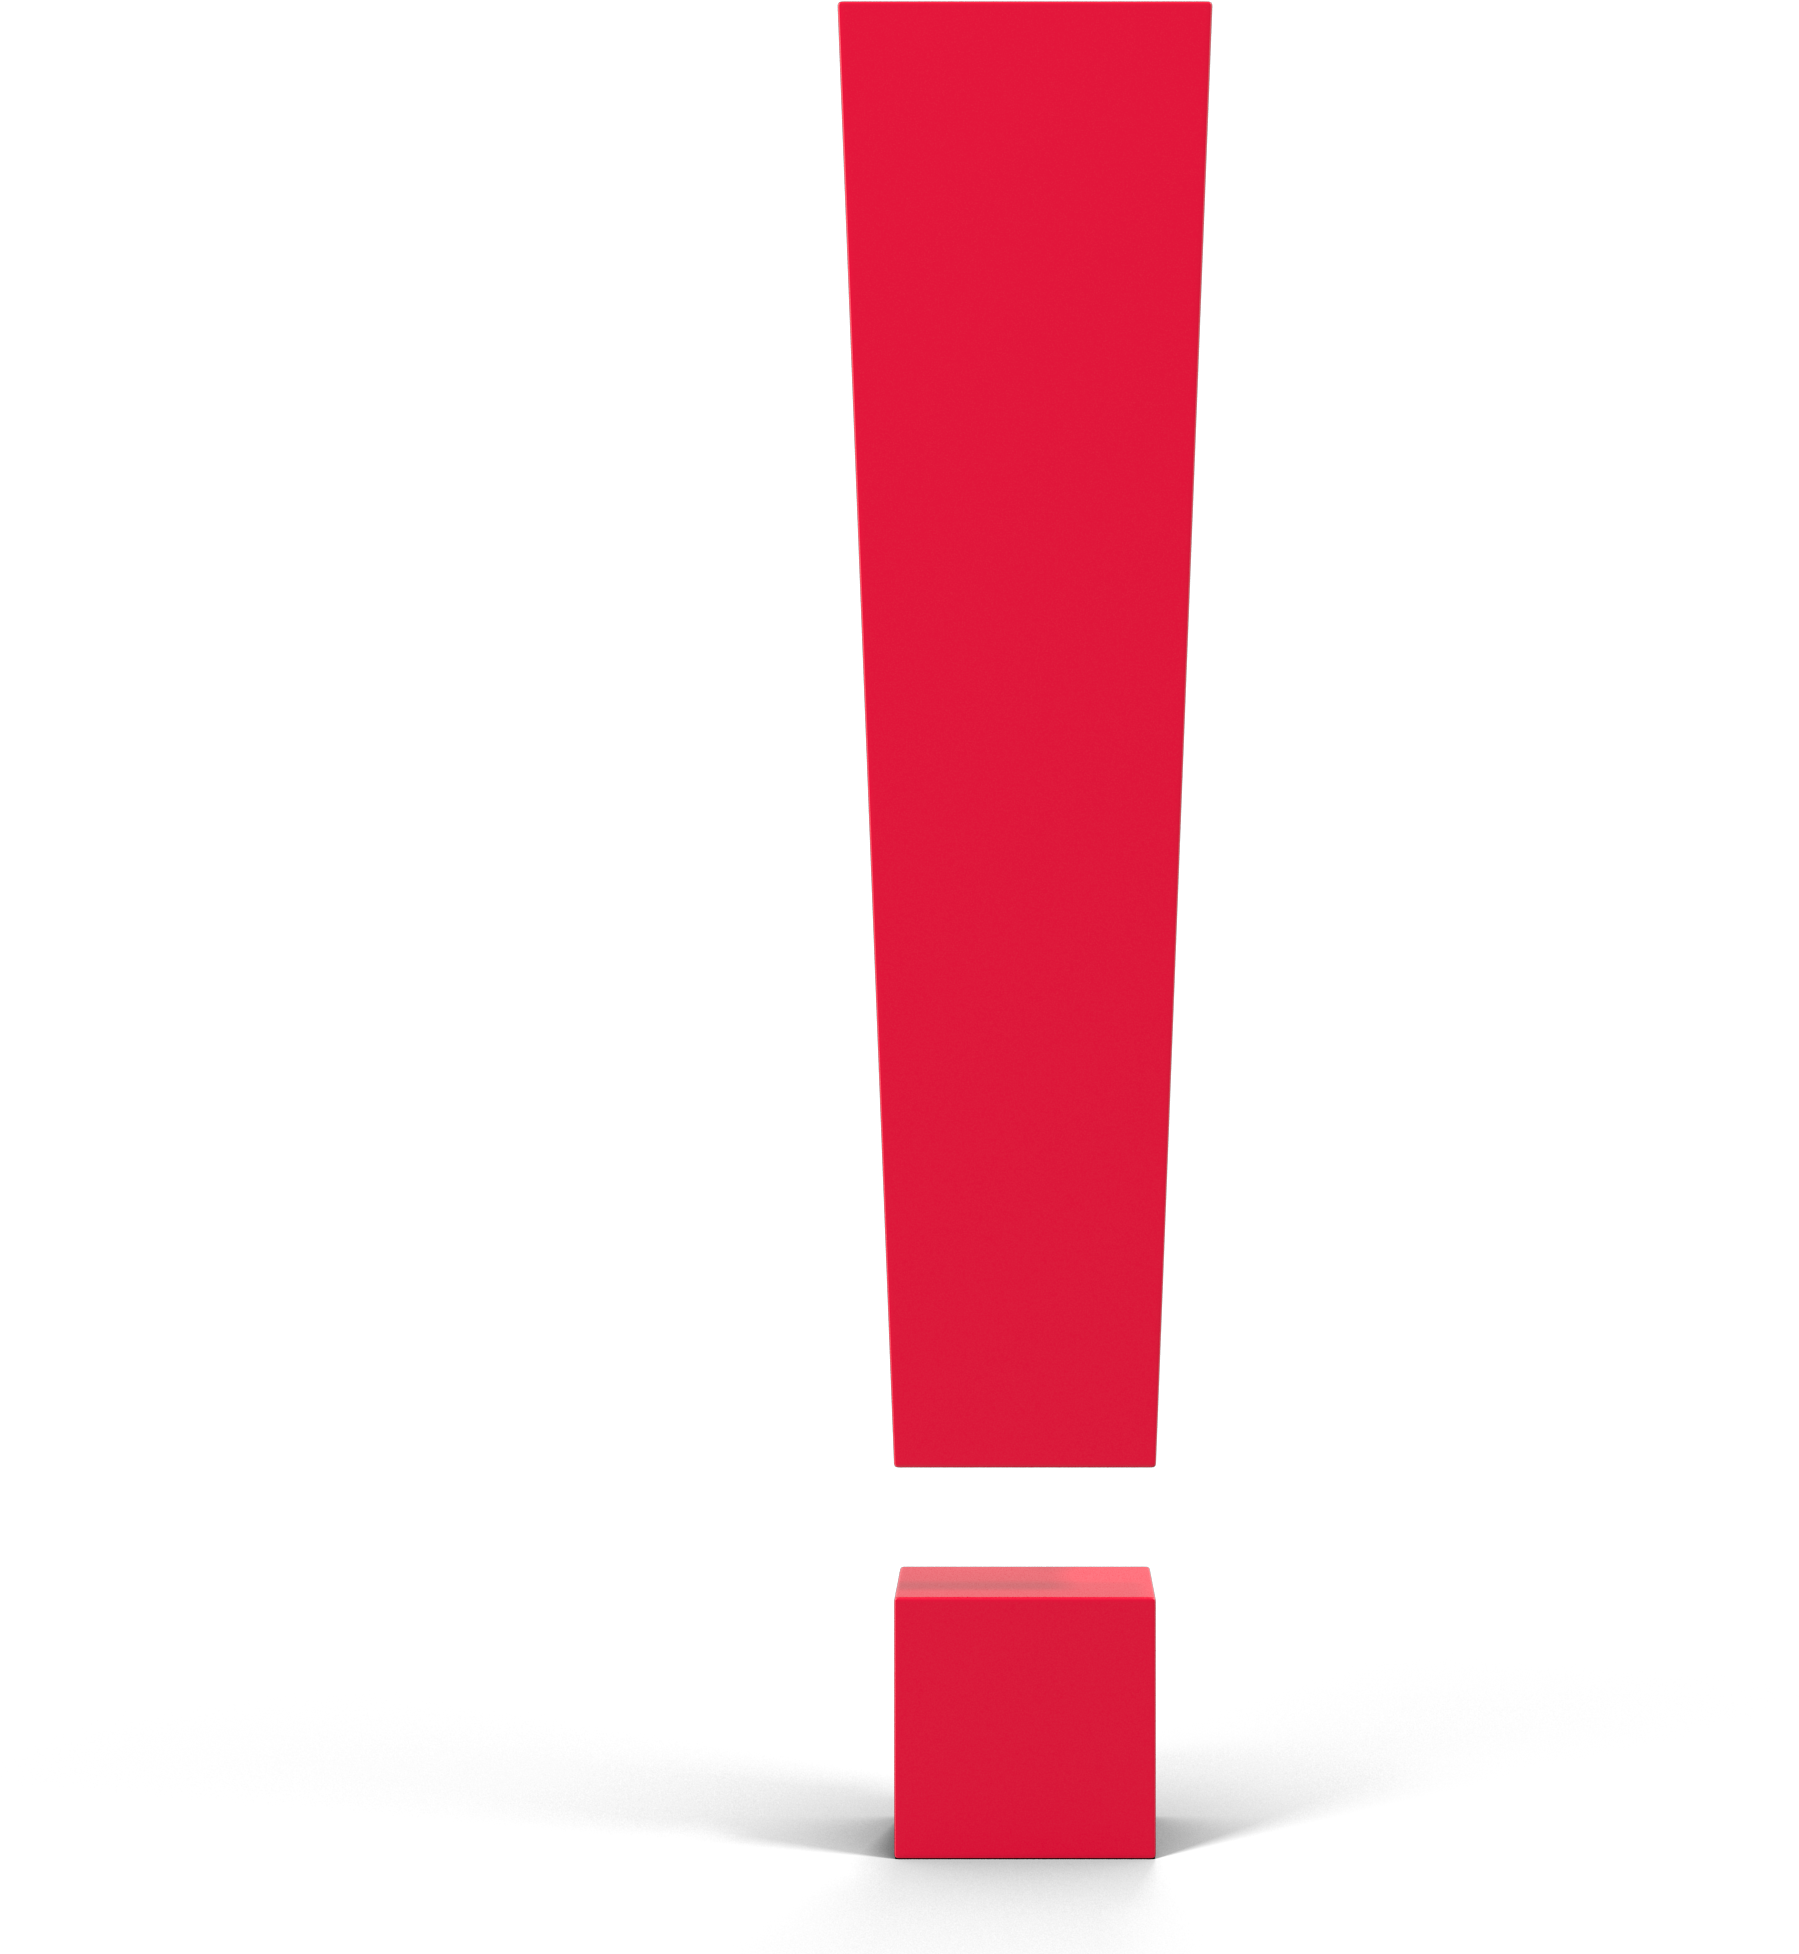 Red Exclamation Mark Transparent PNG